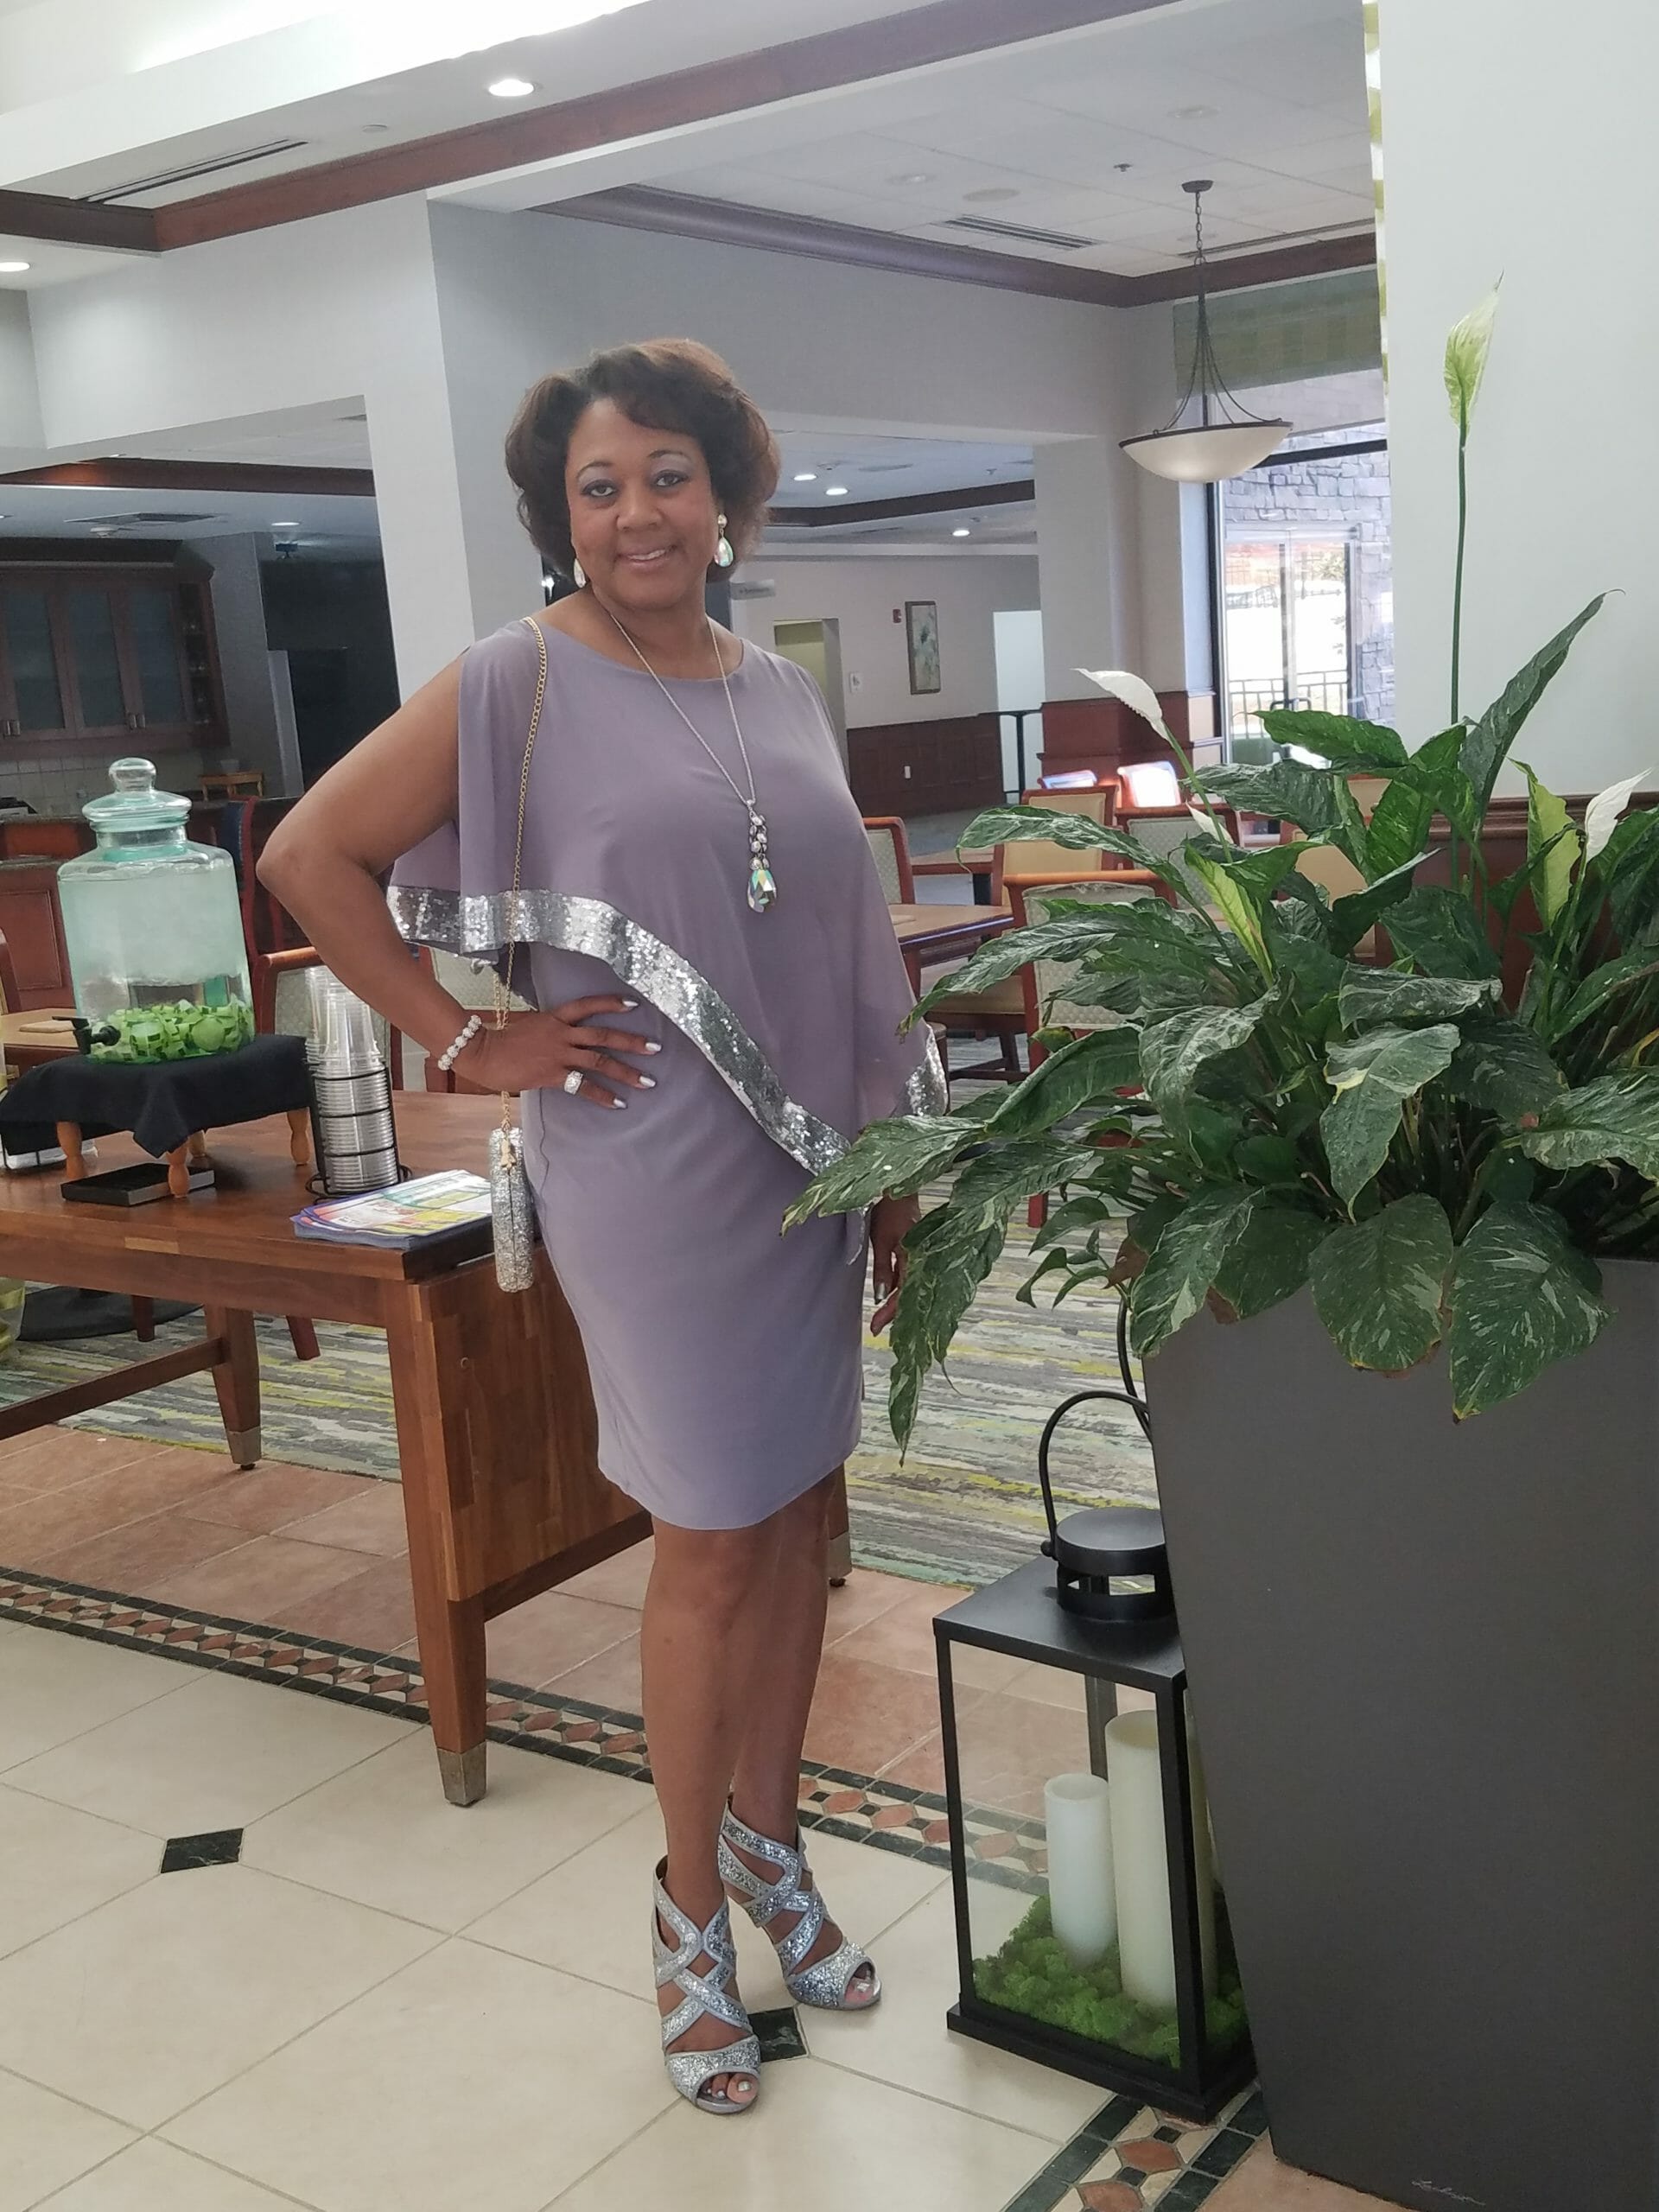 A smiling Midnight Velvet customer, in a lavender dress with silver trim on the cape-like top, and silver heeled sandals.